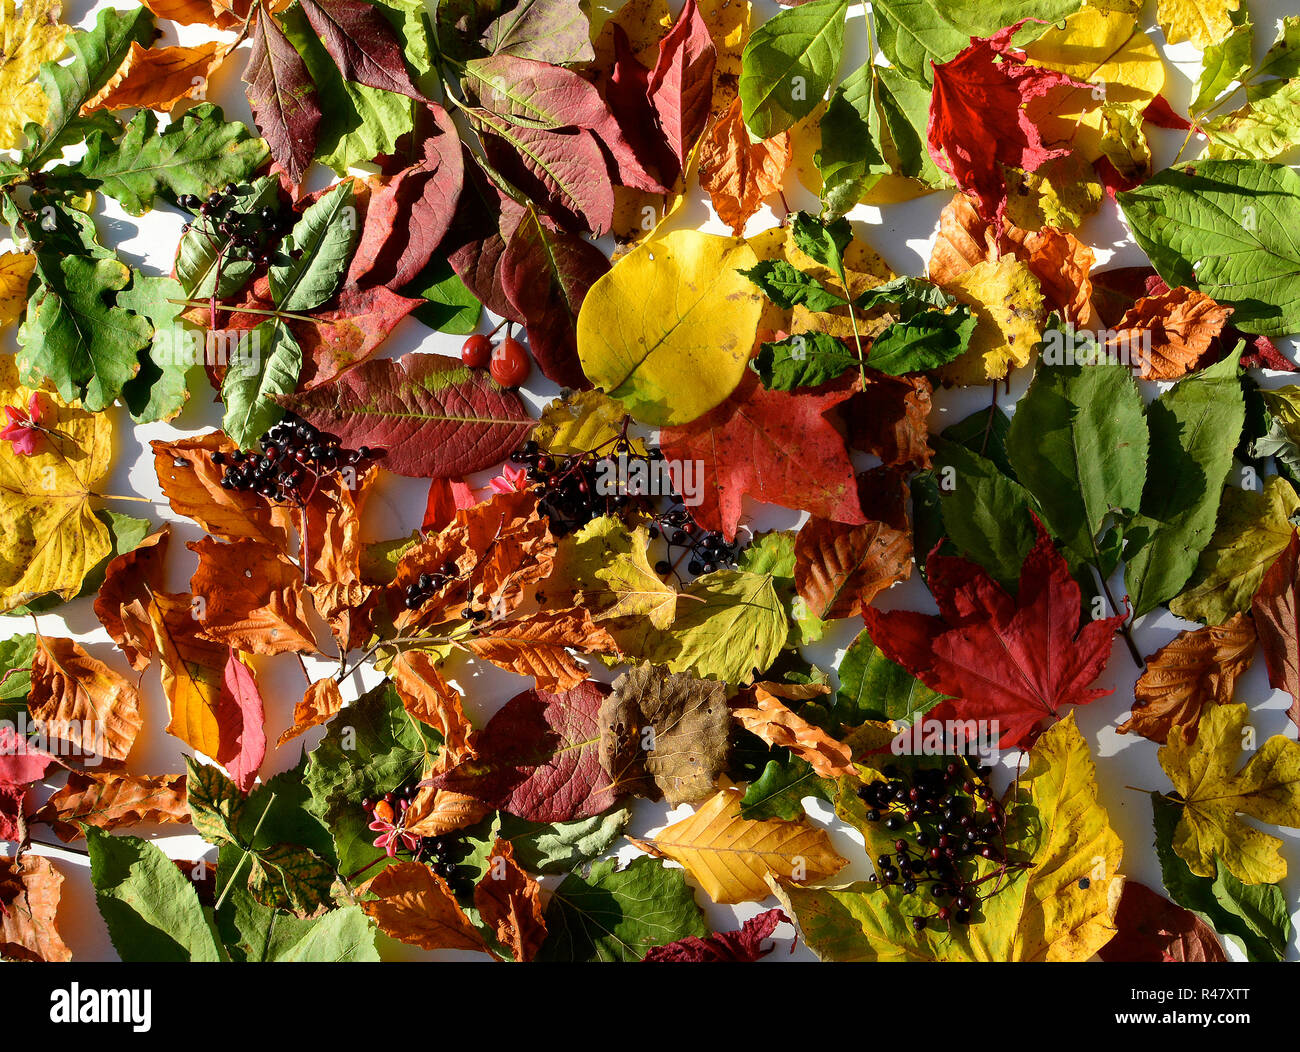 various autumn leaves a surface Stock Photo